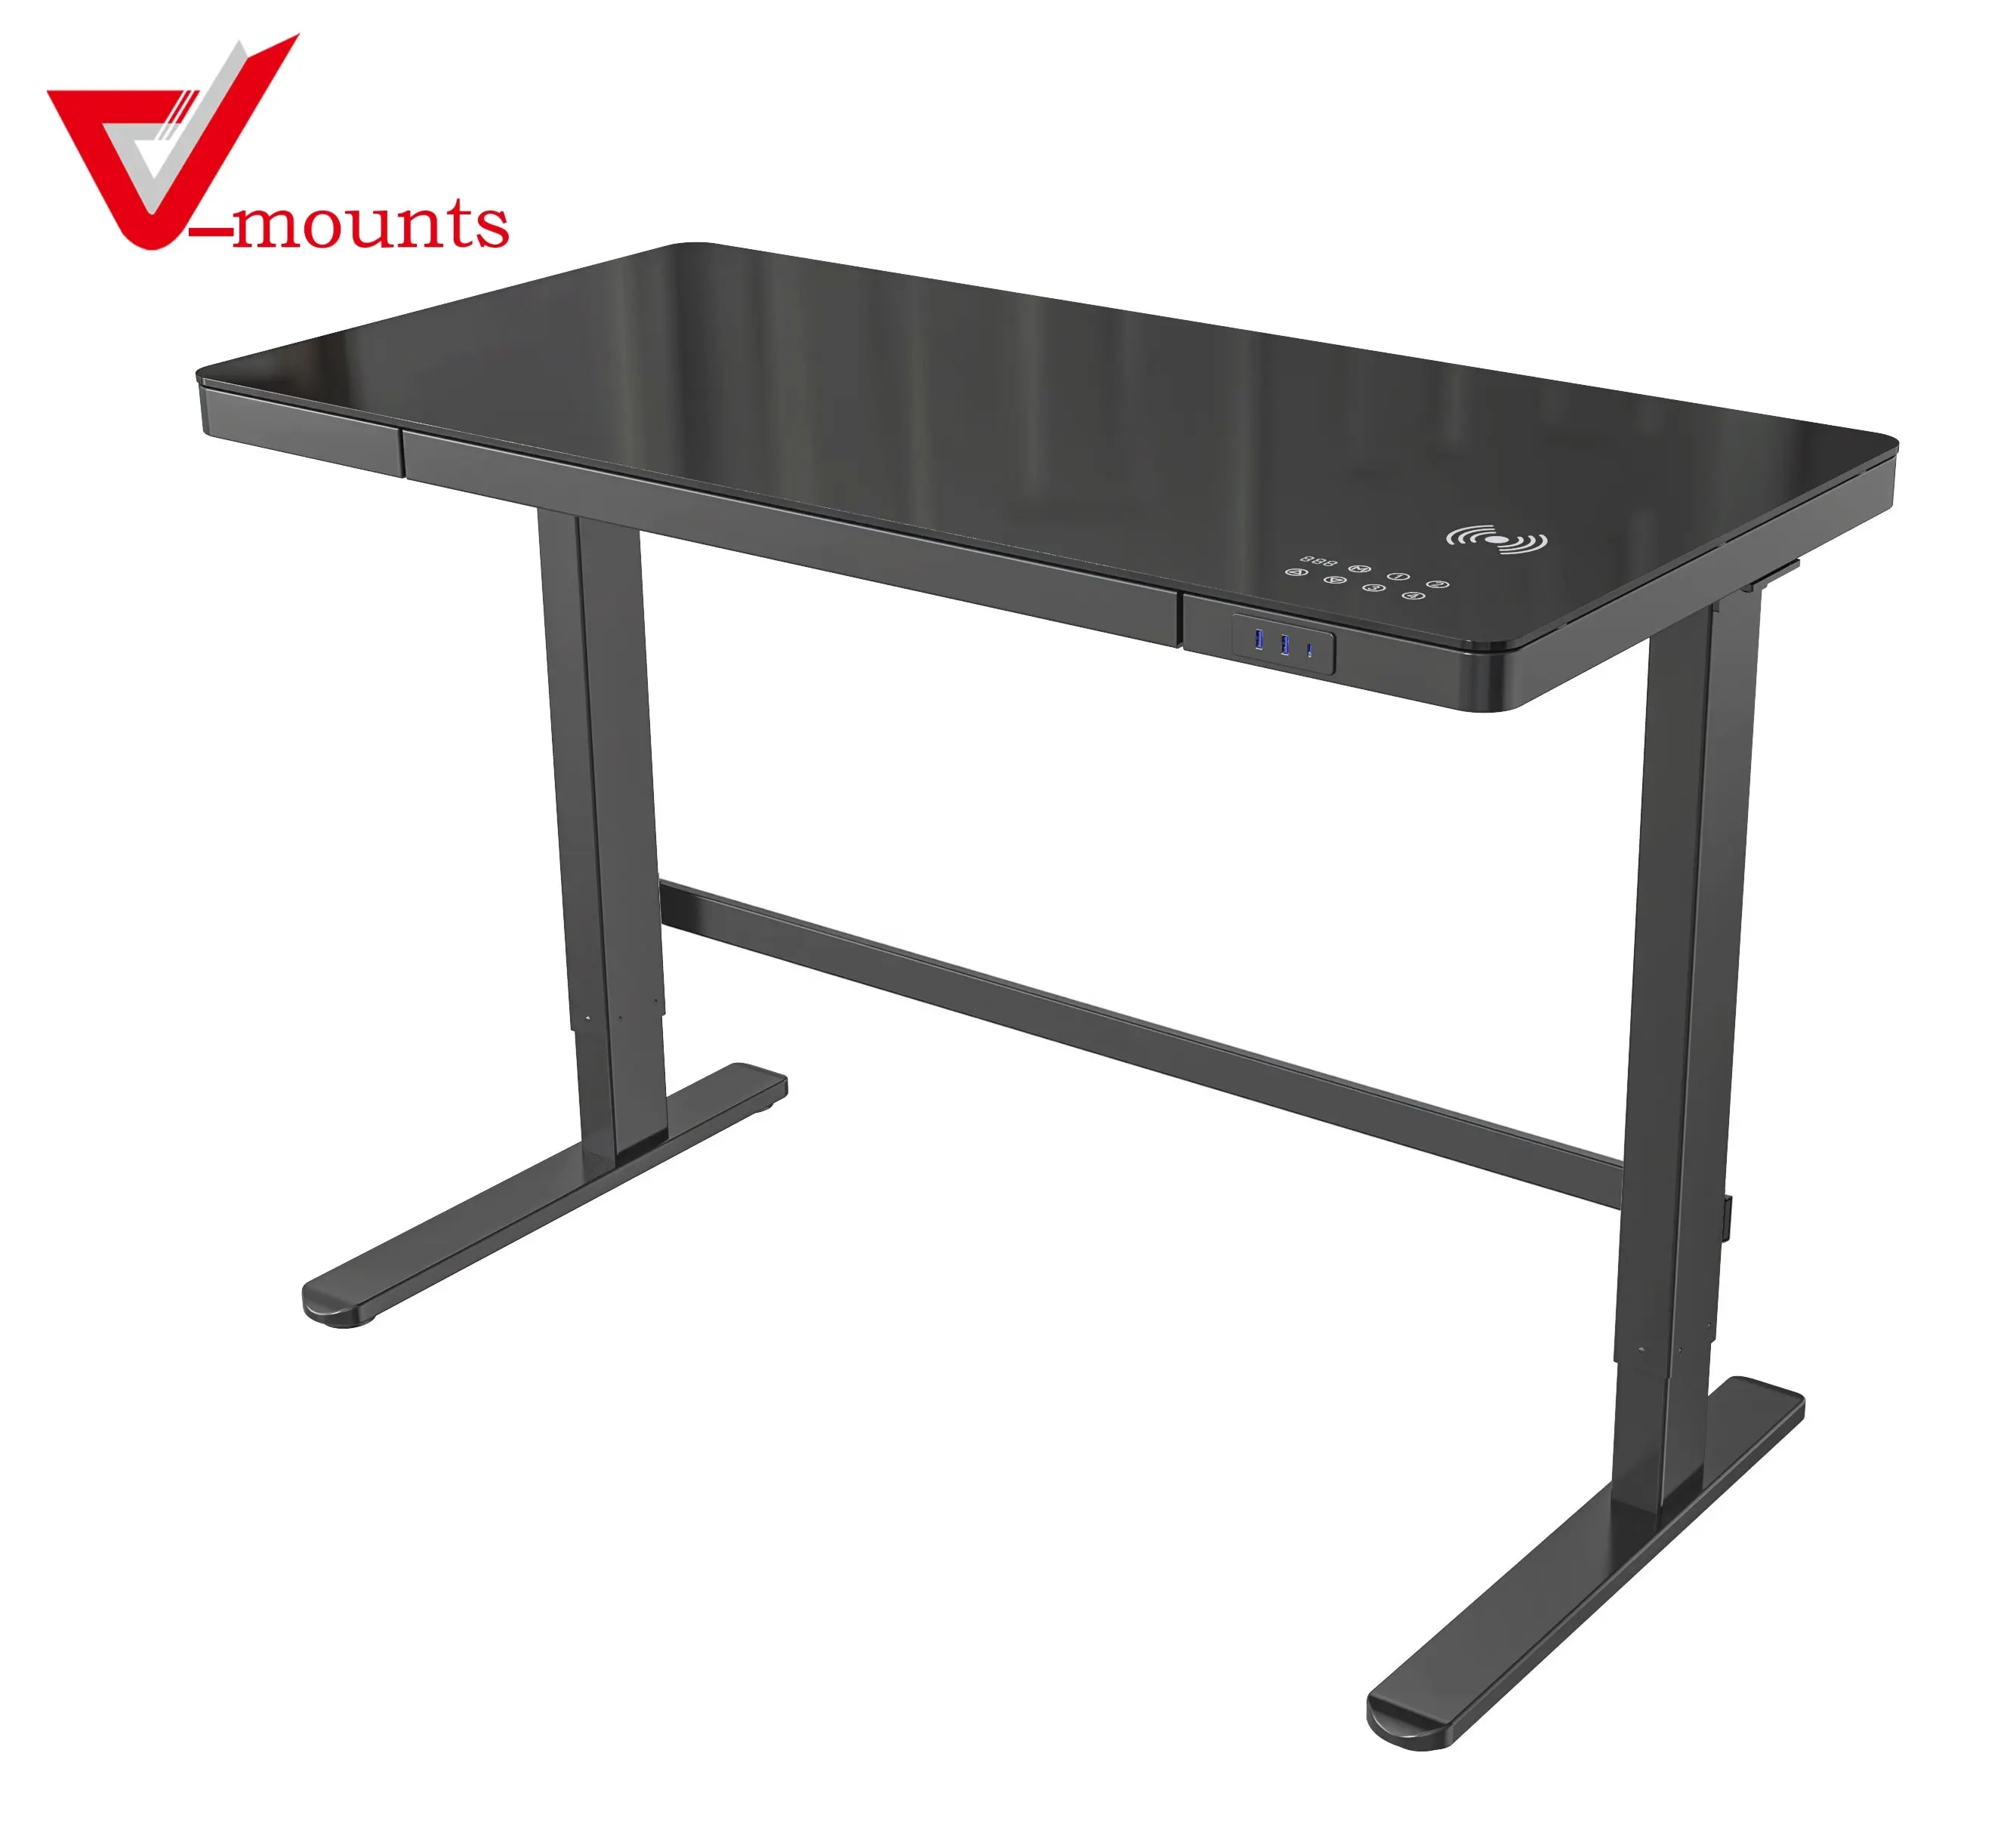 V-mounts office smart height adjustable sturdy and portable mobile ergonomic computer writing desk with storage, modern